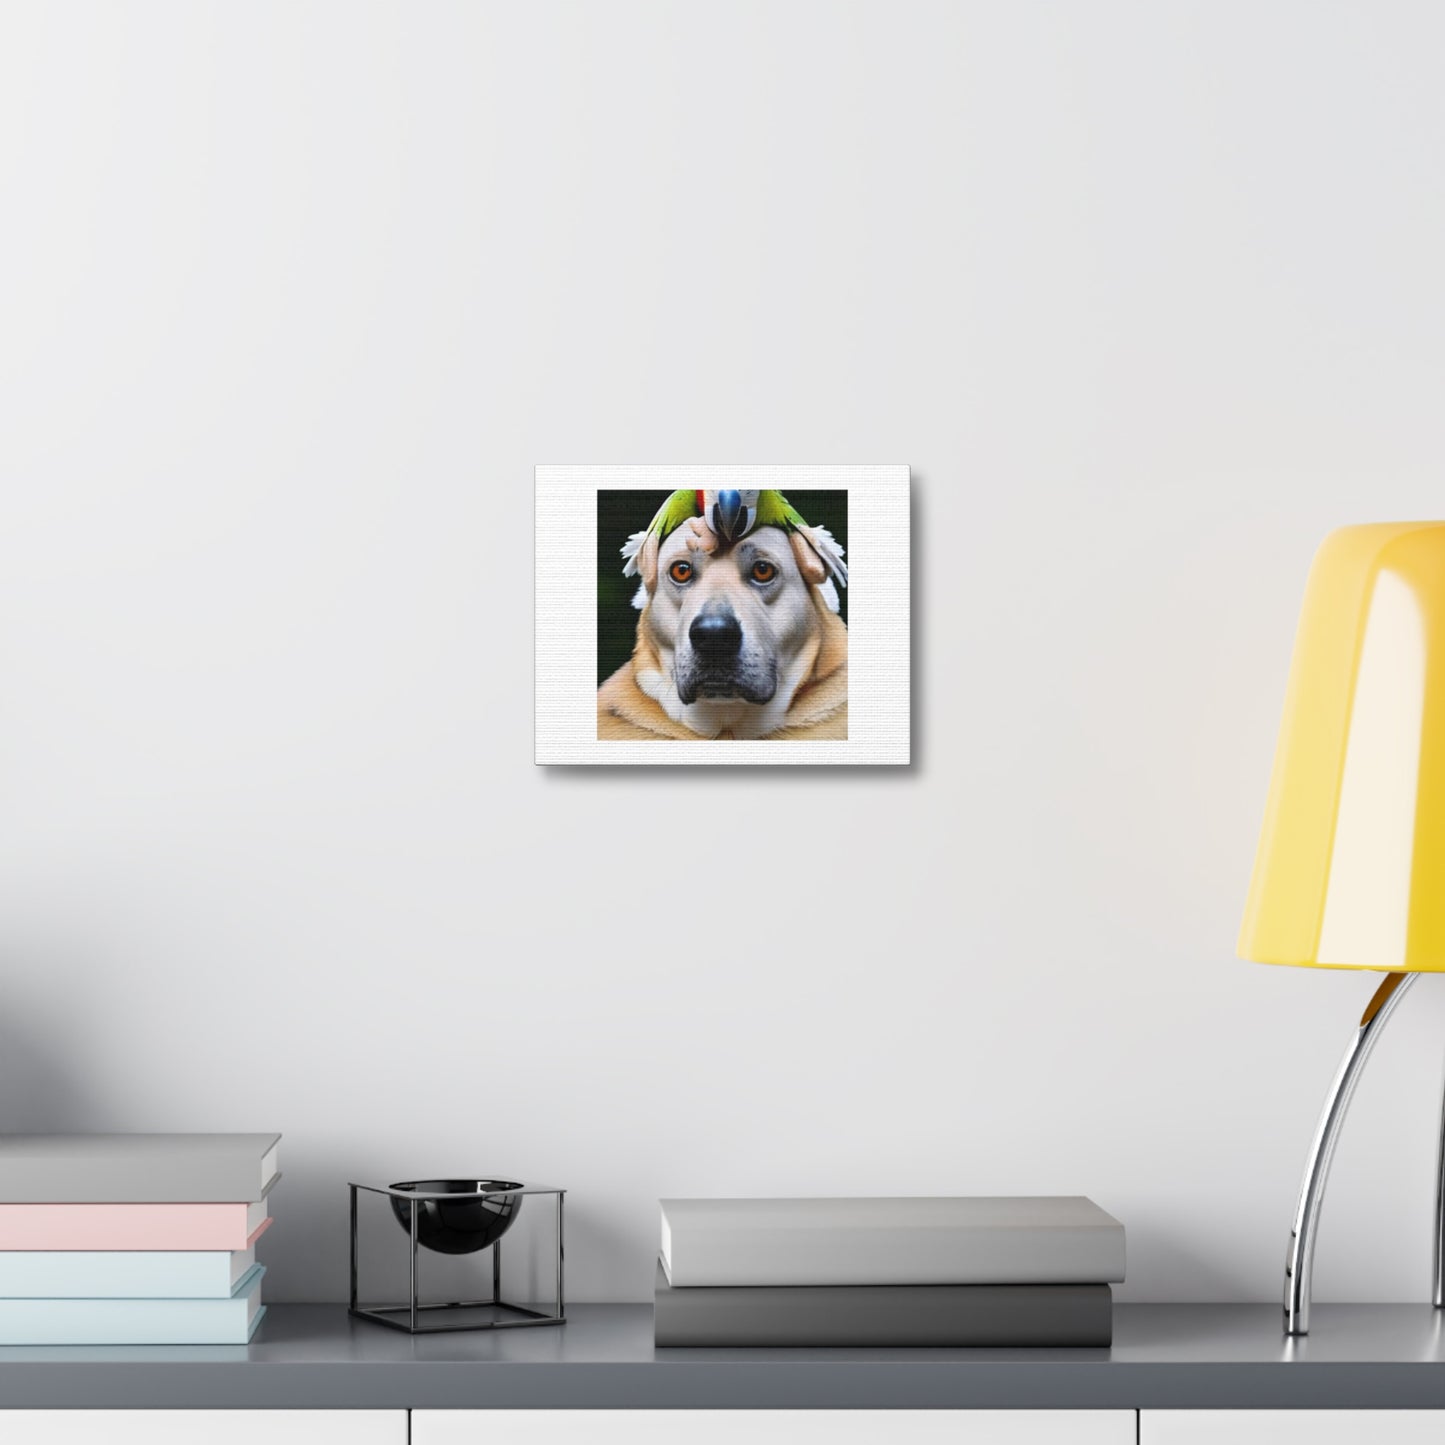 Parrot On Top Of a Dog digital art 'Designed by AI' on Canvas